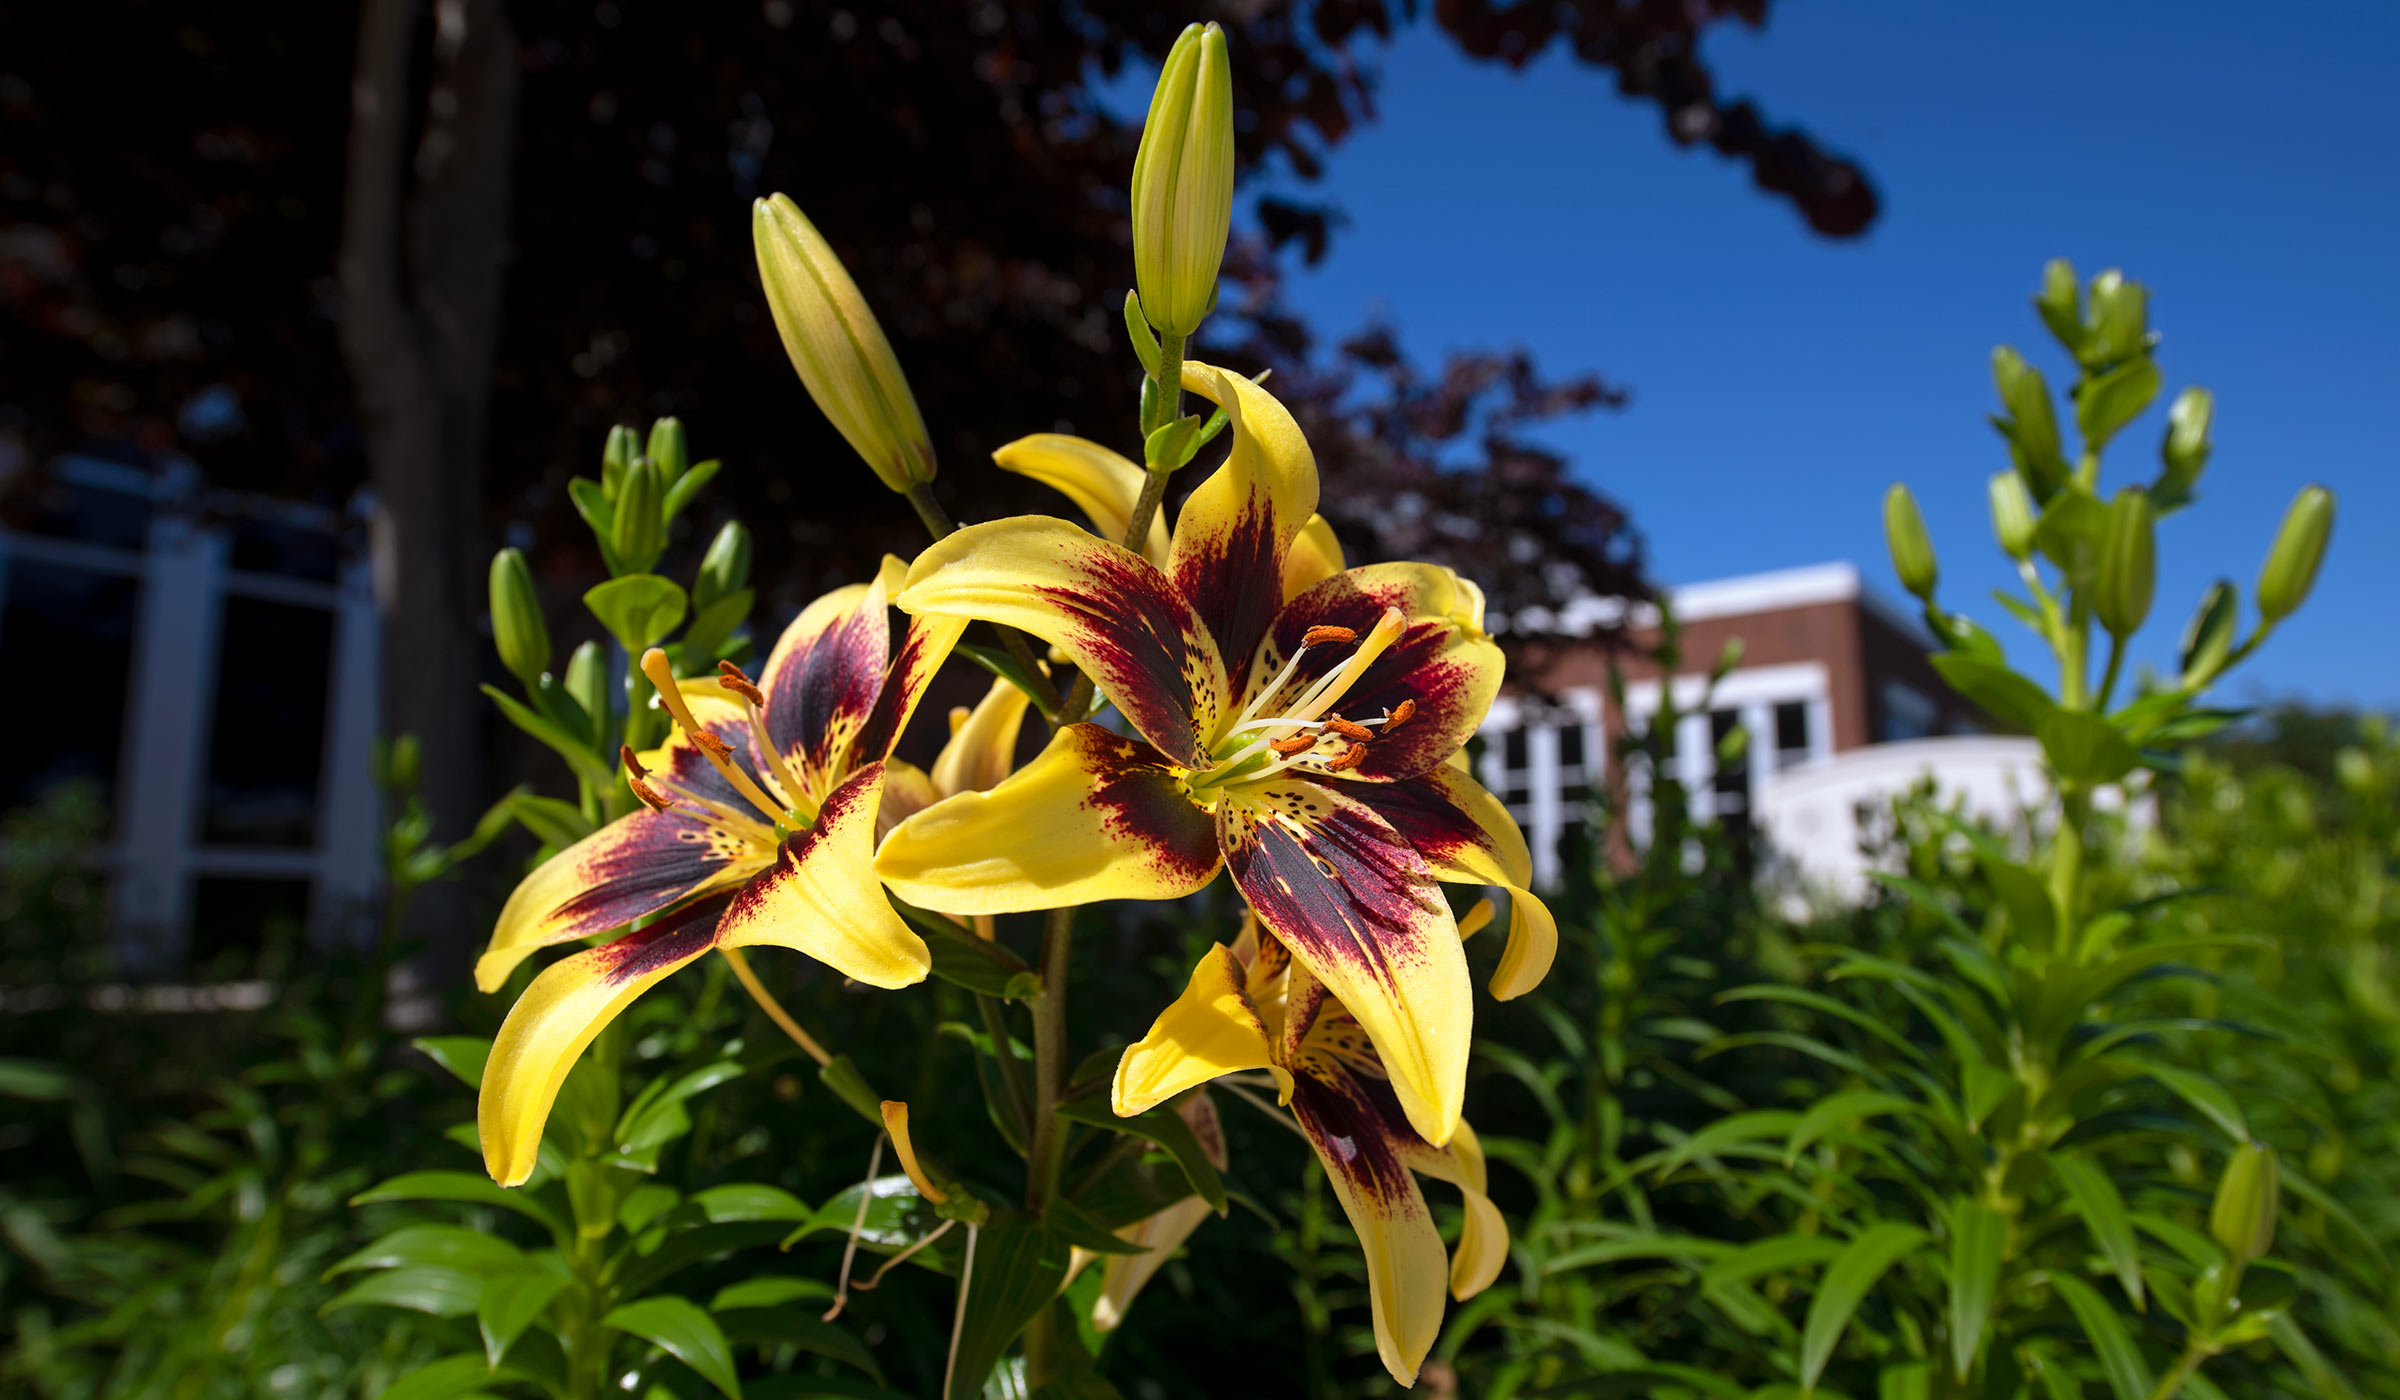 Yellow and maroon day lilies in grass with brick and white building in background